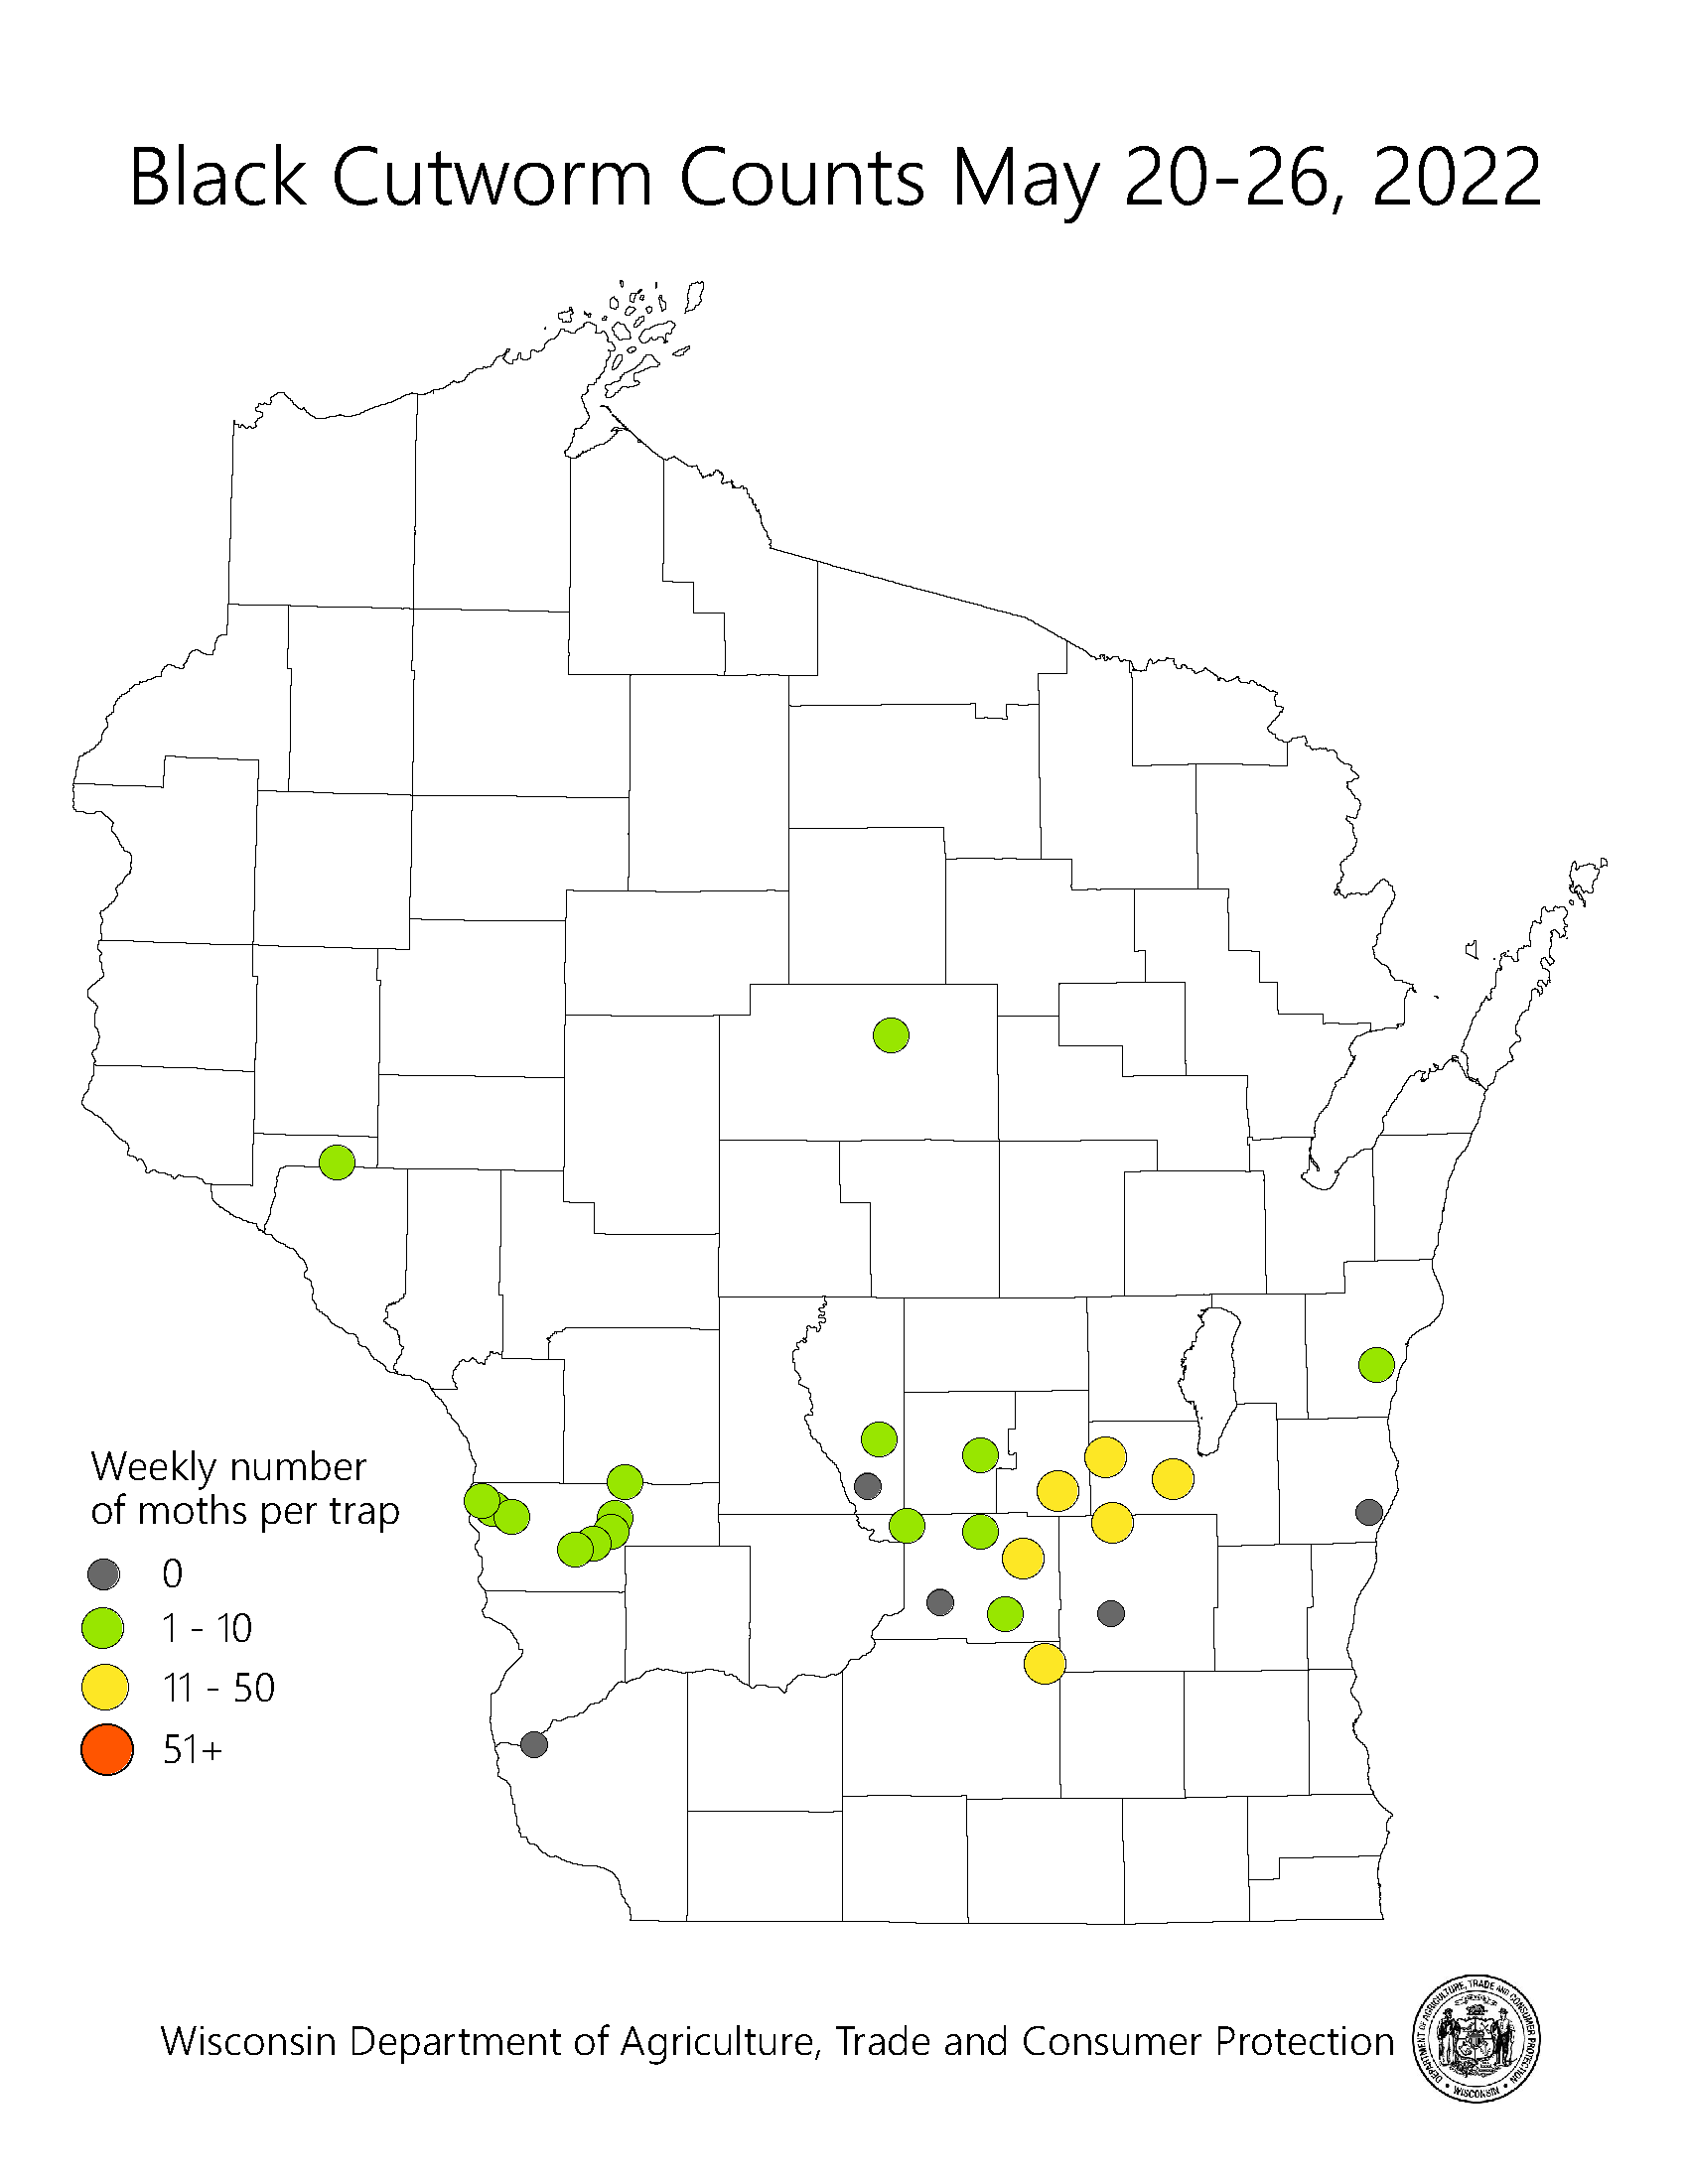 Black Cutworm counts on May 13-19, 2022  in the State of Wisconsin